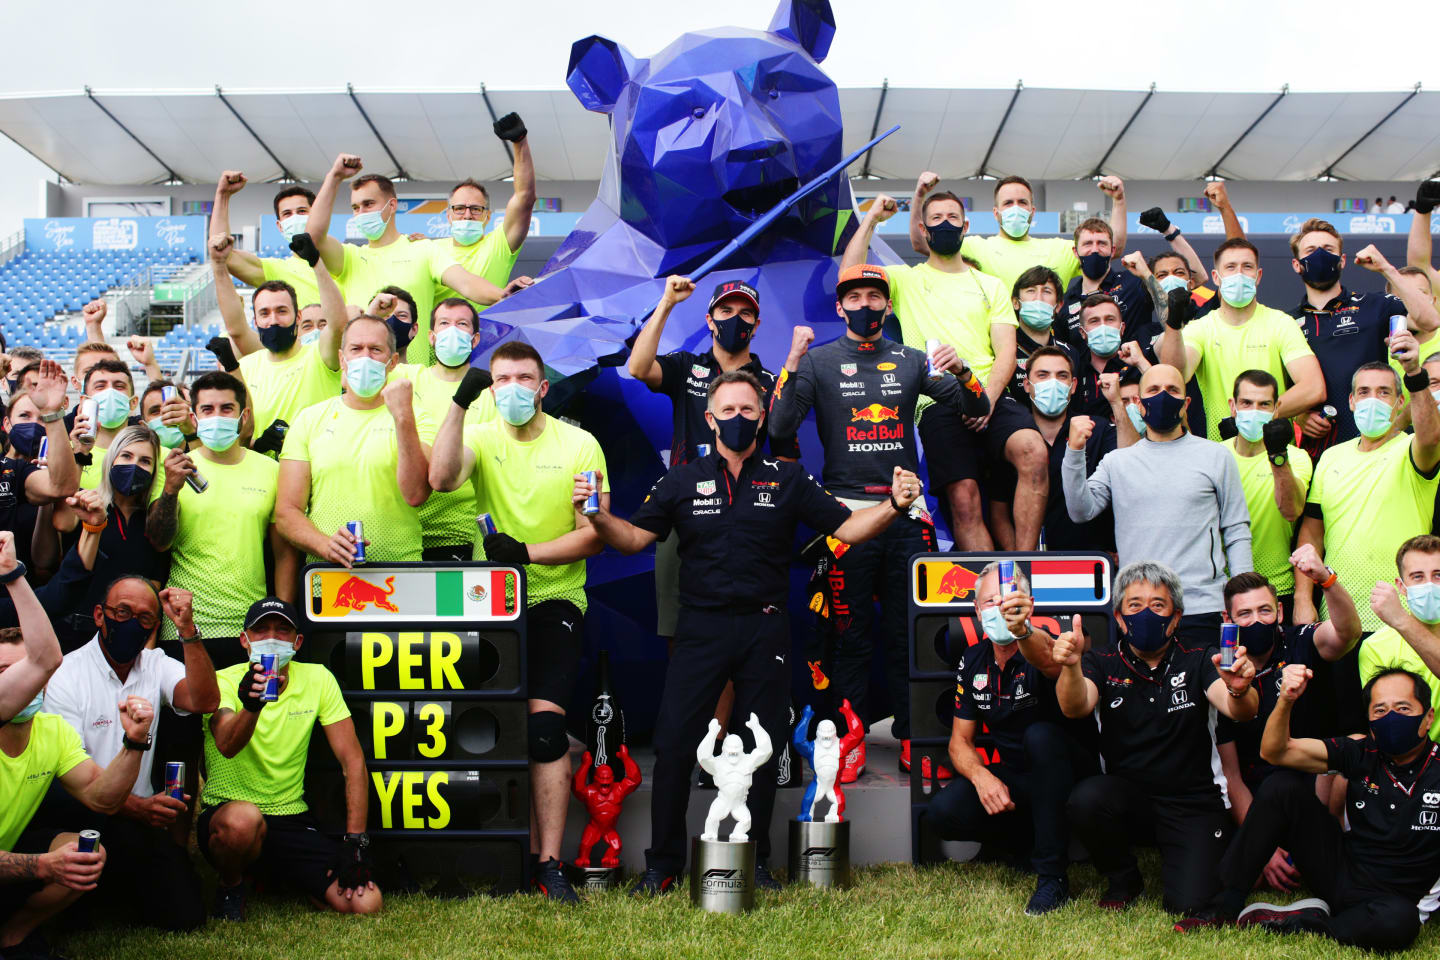 LE CASTELLET, FRANCE - JUNE 20:  Race winner Max Verstappen of Netherlands and Red Bull Racing and third placed Sergio Perez of Mexico and Red Bull Racing celebrate with Red Bull Racing Team Principal Christian Horner and their team in the Paddock after the F1 Grand Prix of France at Circuit Paul Ricard on June 20, 2021 in Le Castellet, France. (Photo by Peter Fox/Getty Images)